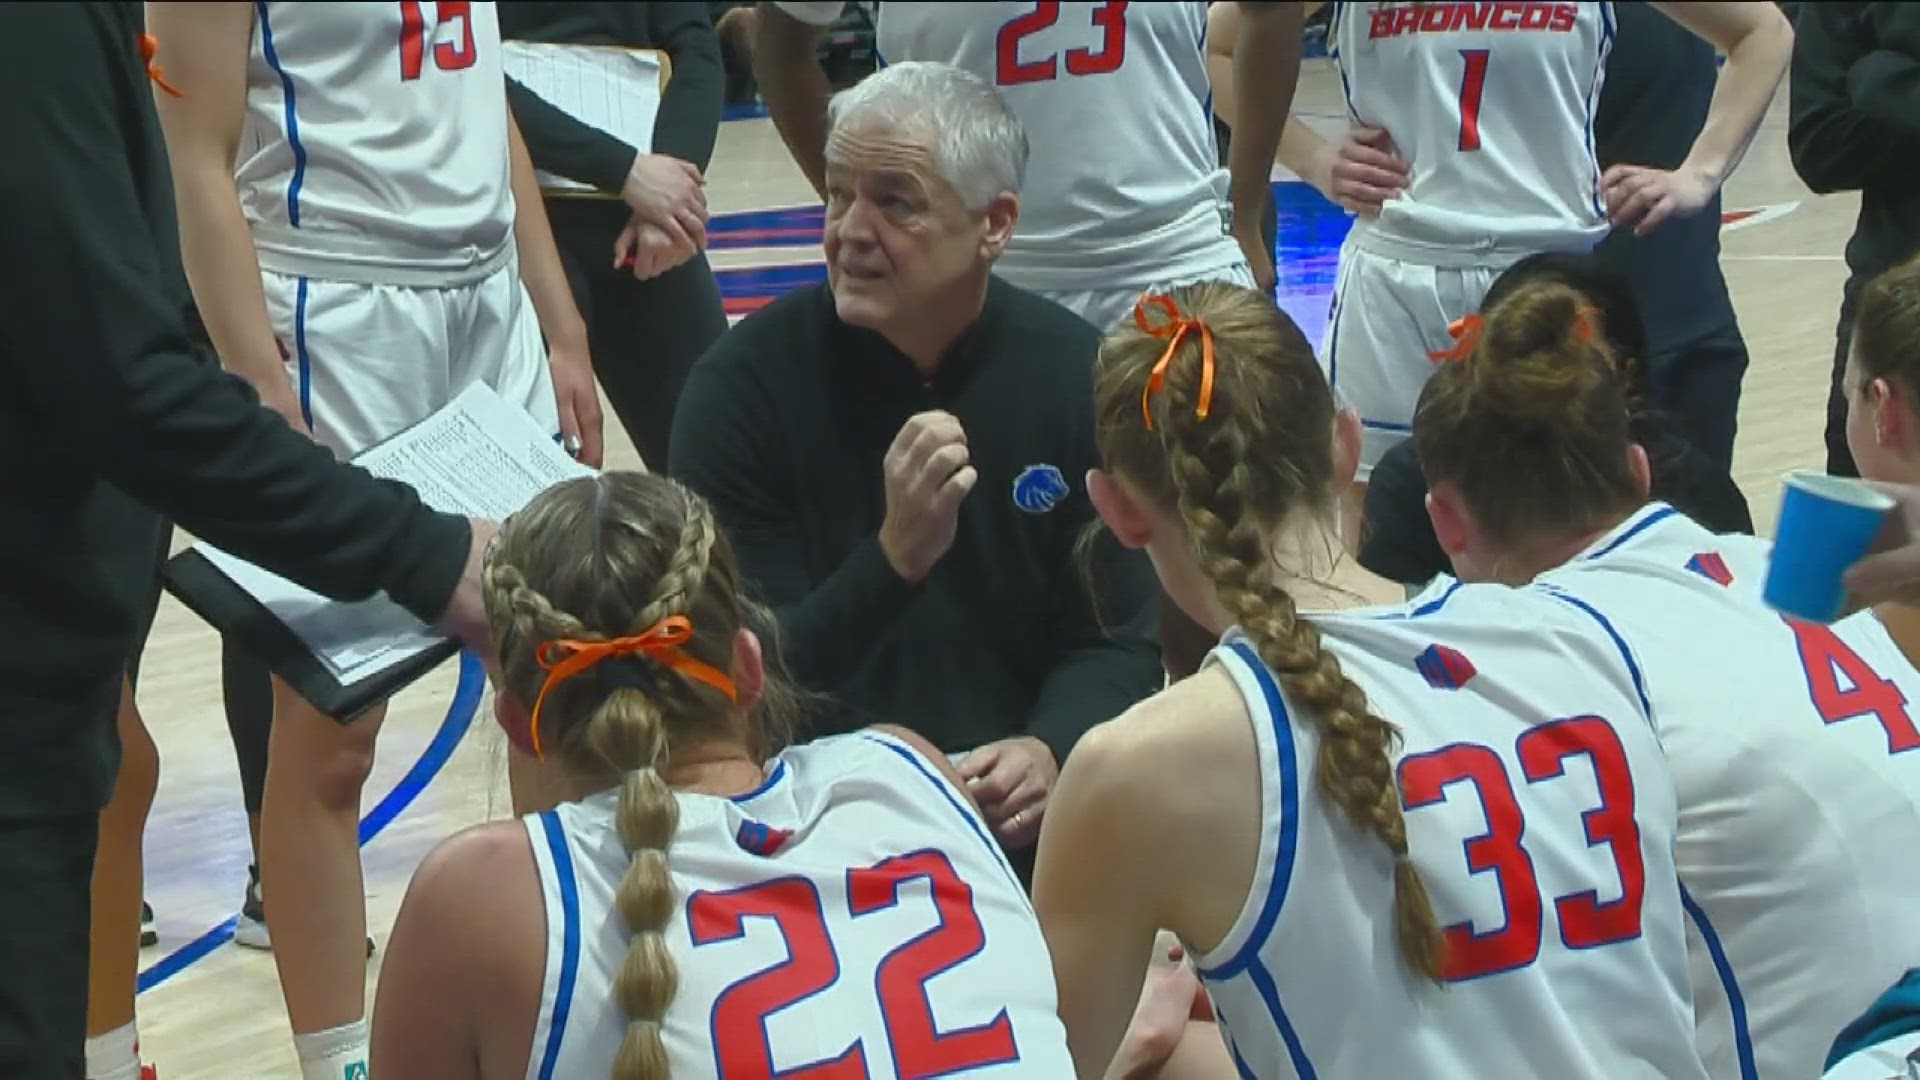 Boise State is headed to Missoula for its first WNIT appearance since 2008. The Broncos battle the Grizzlies on Wednesday in the opening round.